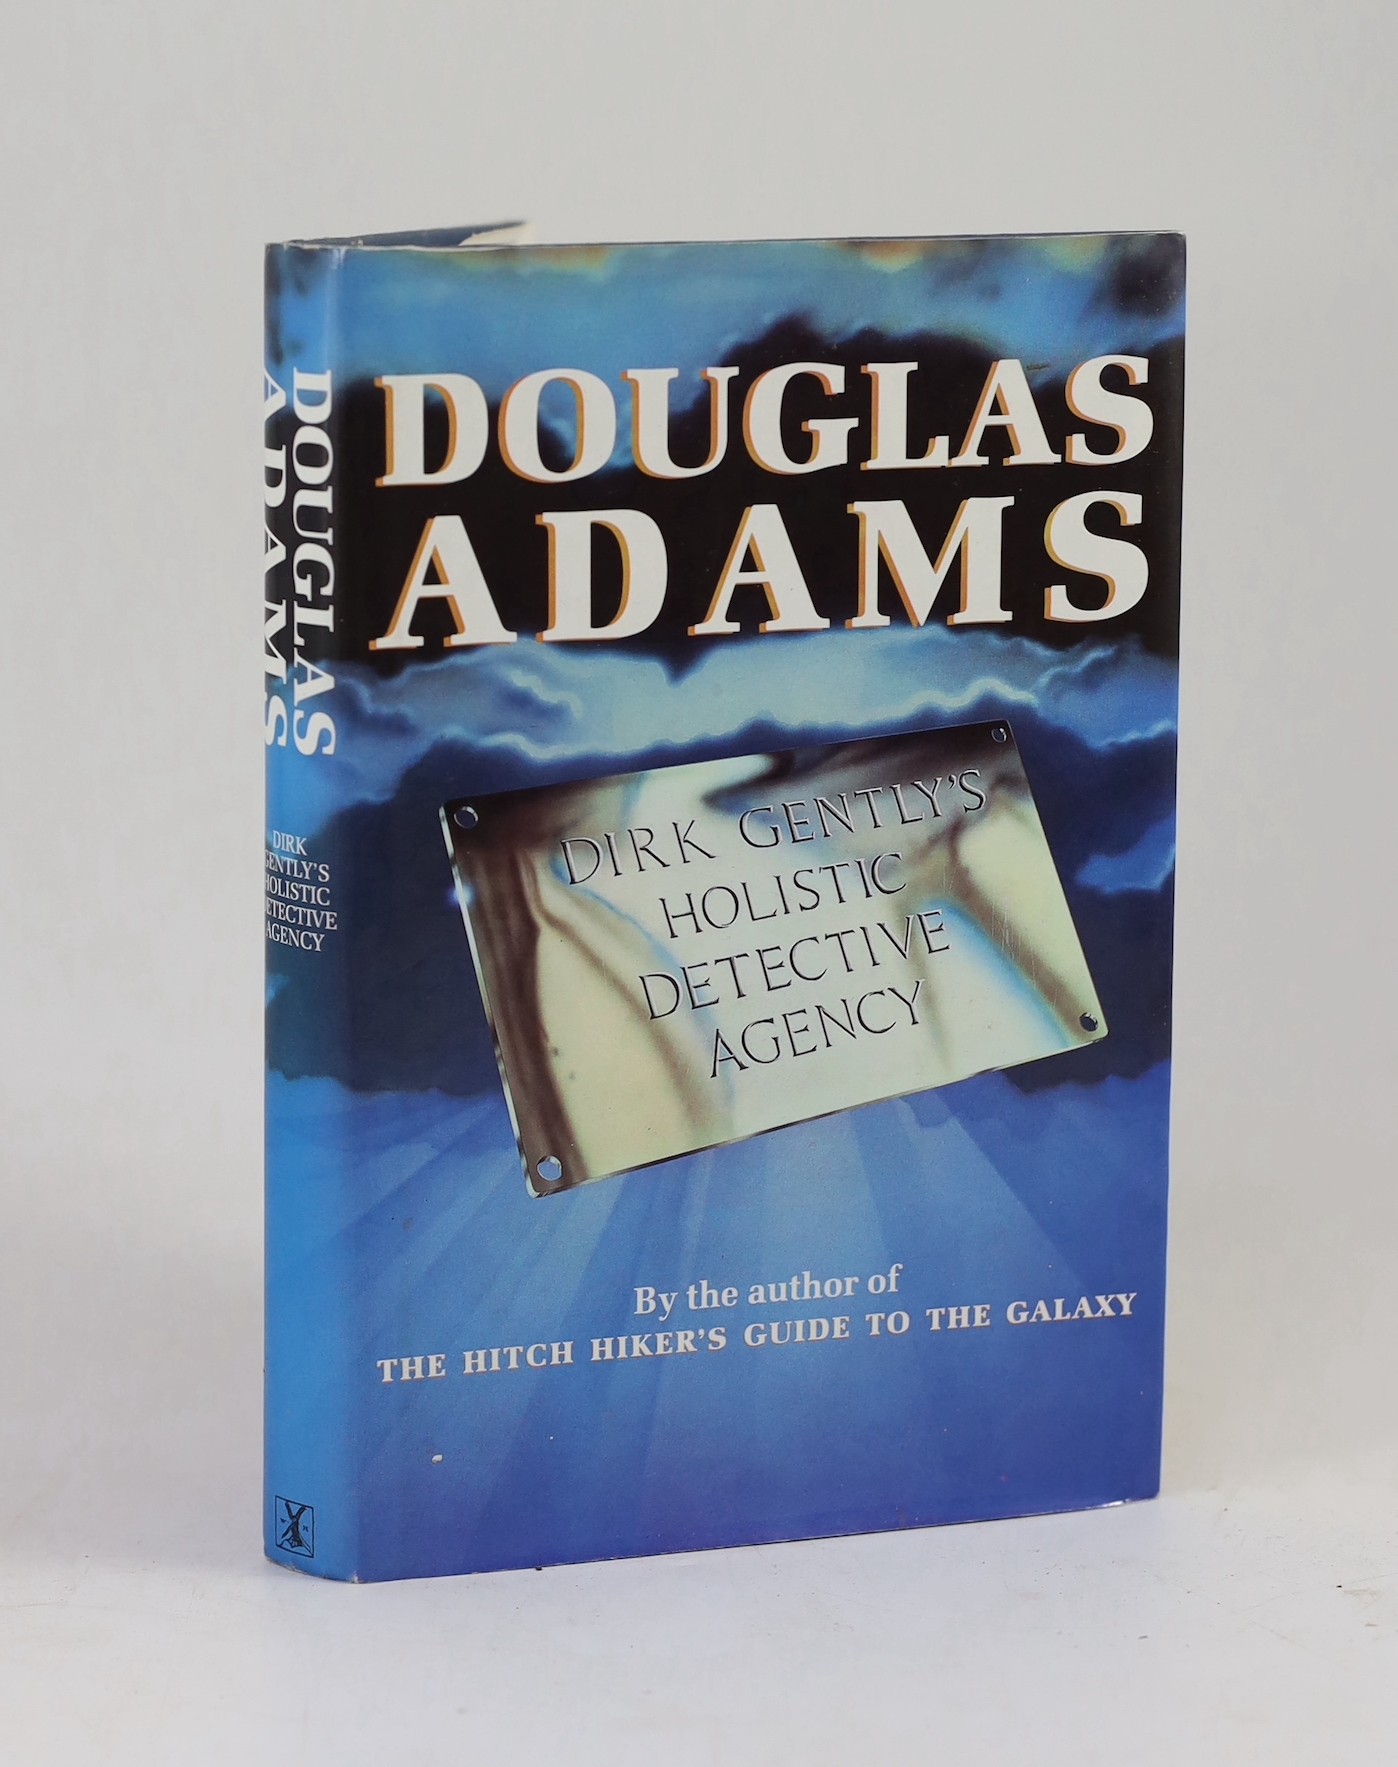 Adams, Douglas - Dirk Gentley’s Holistic Detective Agency, 1st edition, signed by the author, 8vo, original cloth with unclipped d/j, mild toning to outer text block, Heinemann, London, 1987